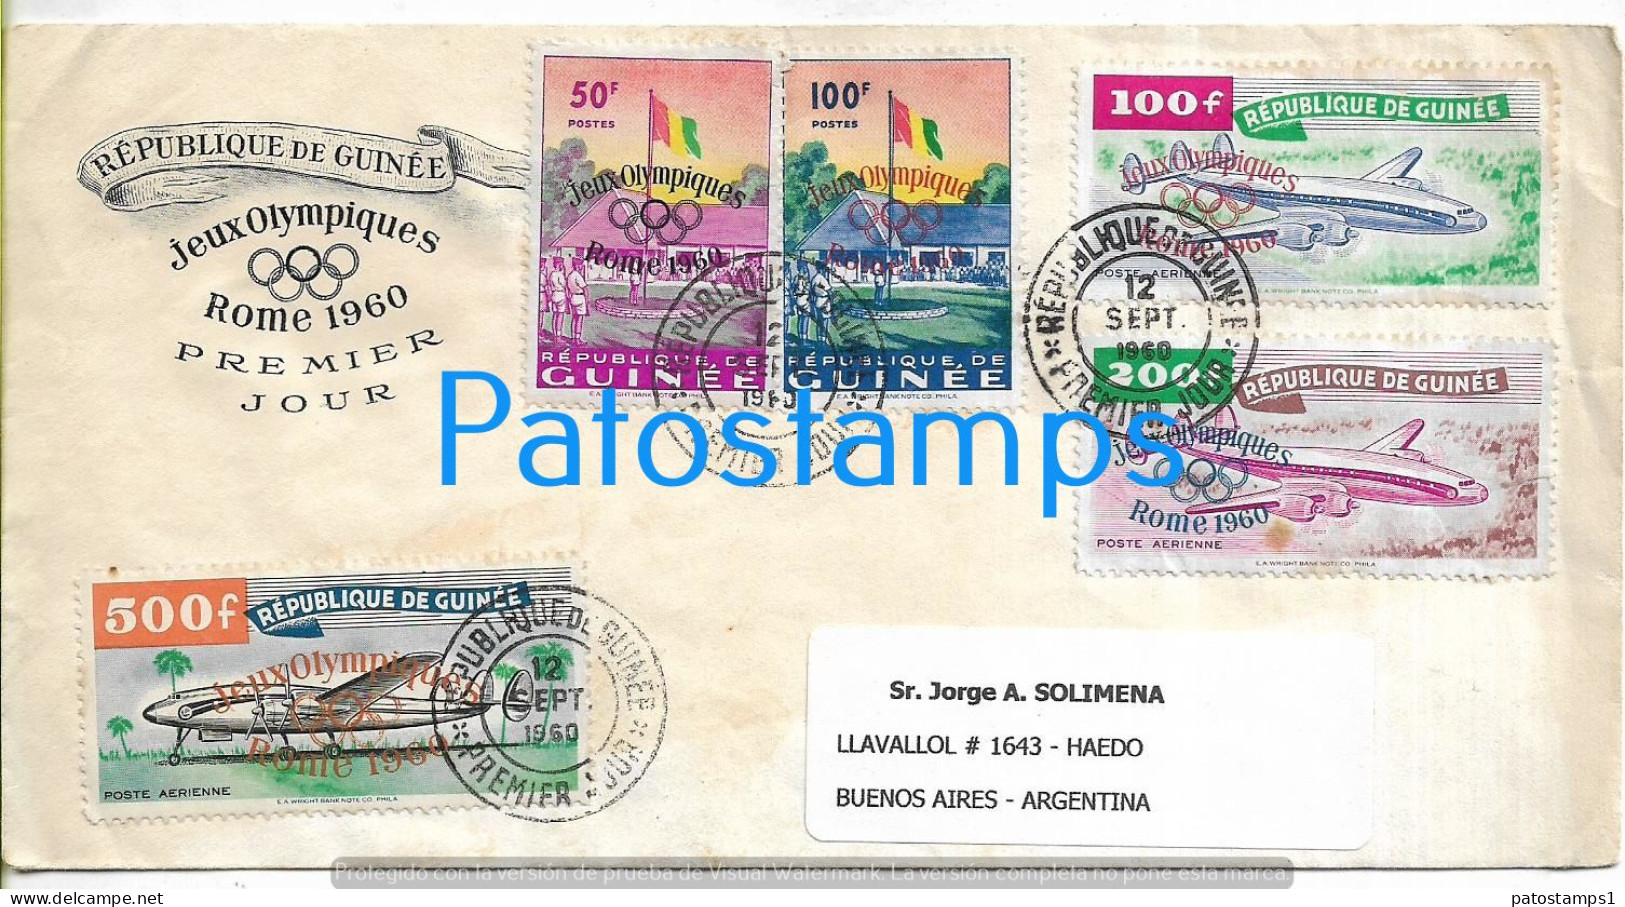 226331 AFRICA REPUBLIC GUINEE COVER CANCEL YEAR 1960 OLYMPIC GAMES CIRCULATED TO ARGENTINA NO POSTCARD - Autres - Afrique